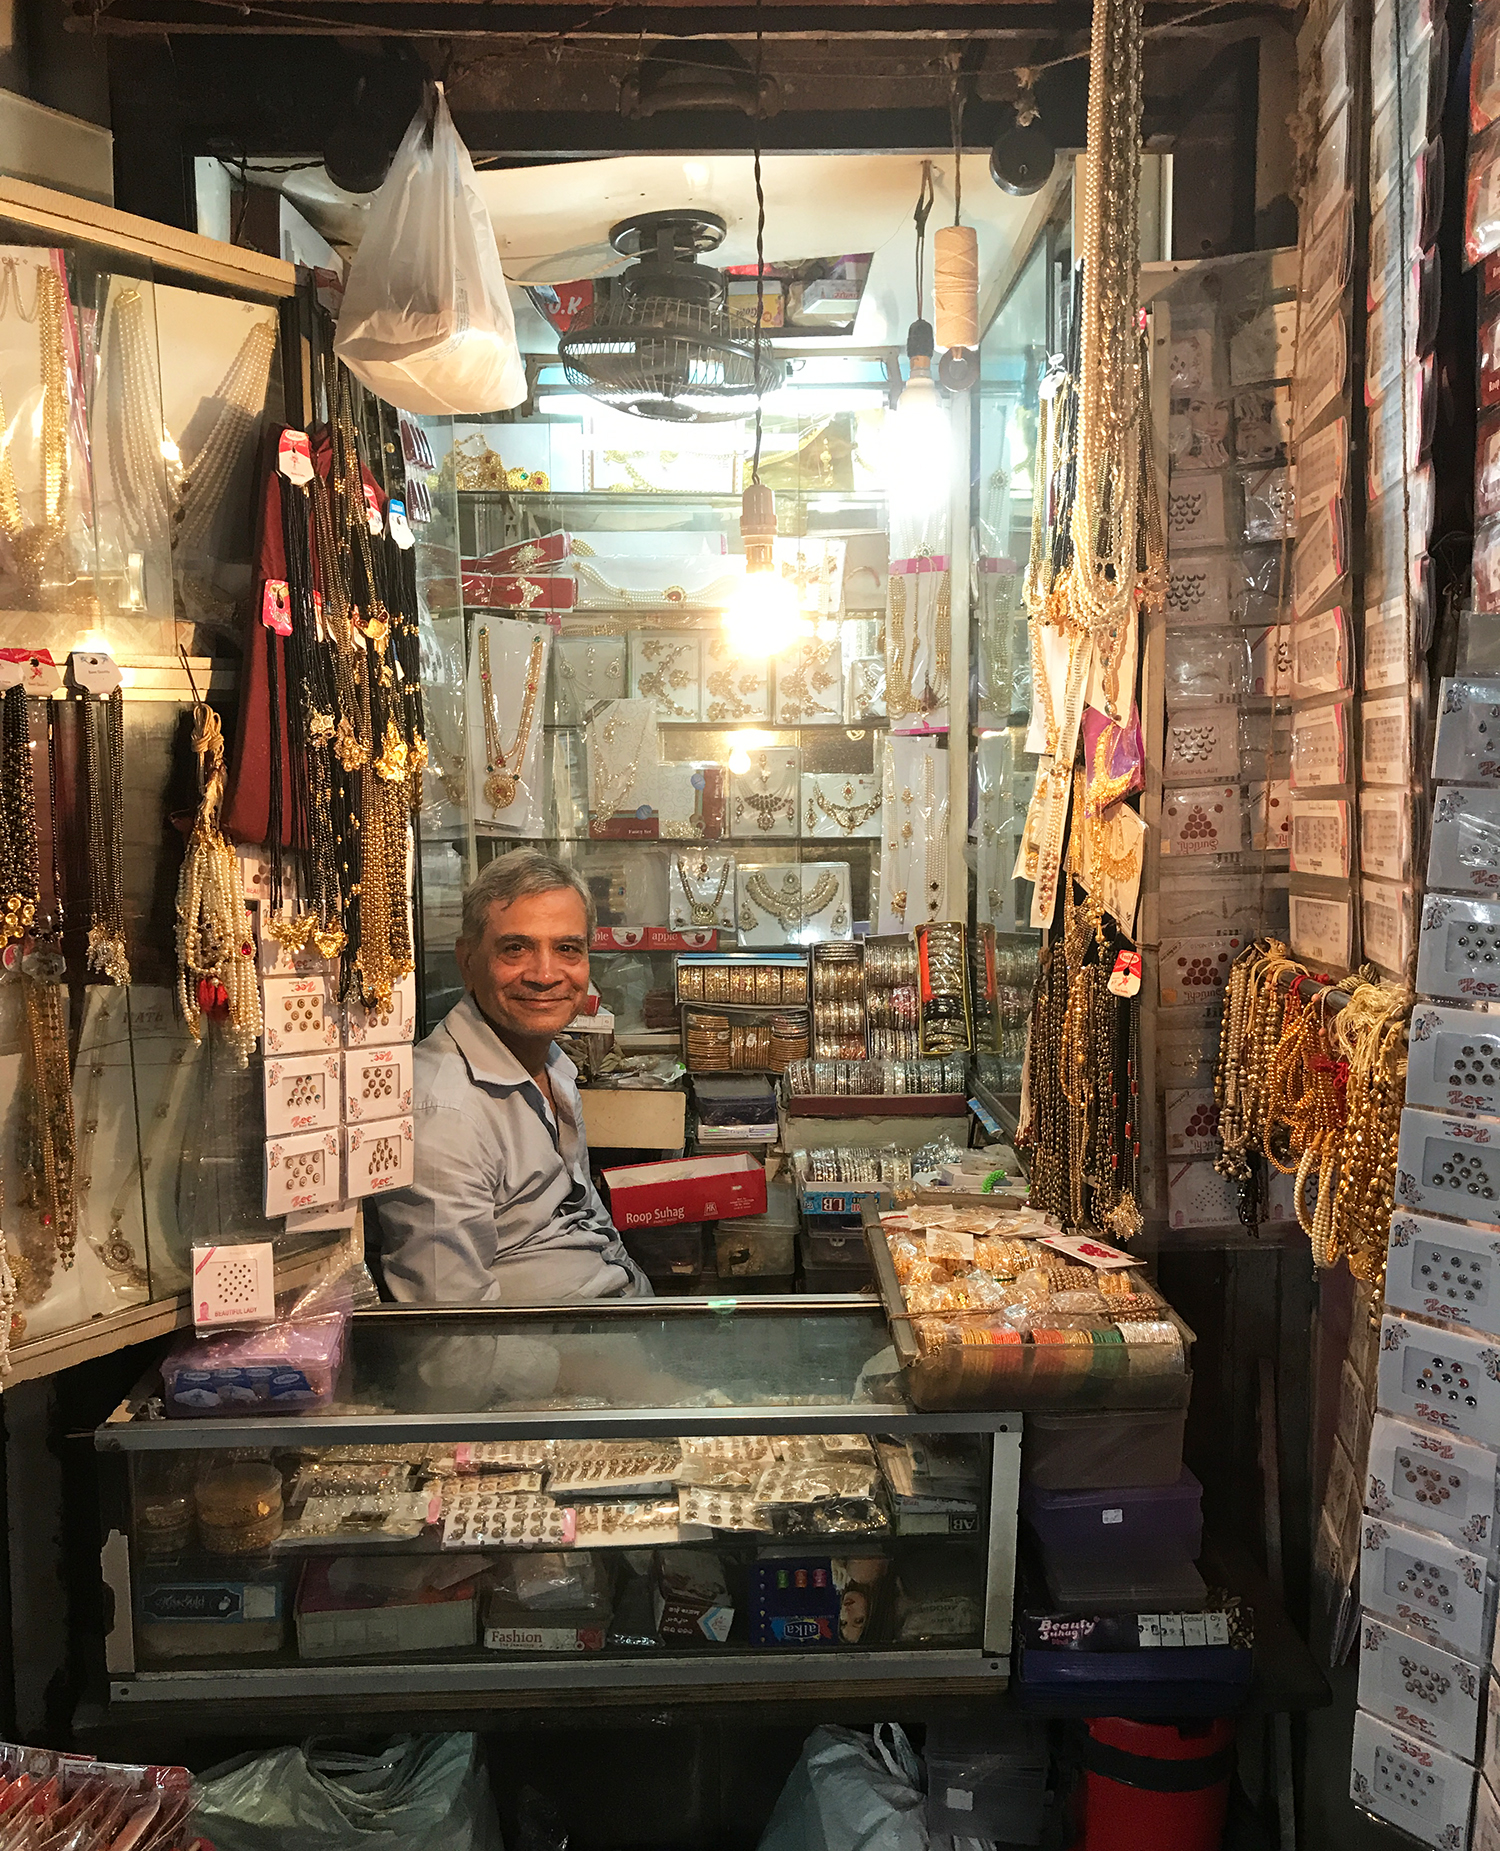 A tiny 70 years old jewelry shop and its owner.